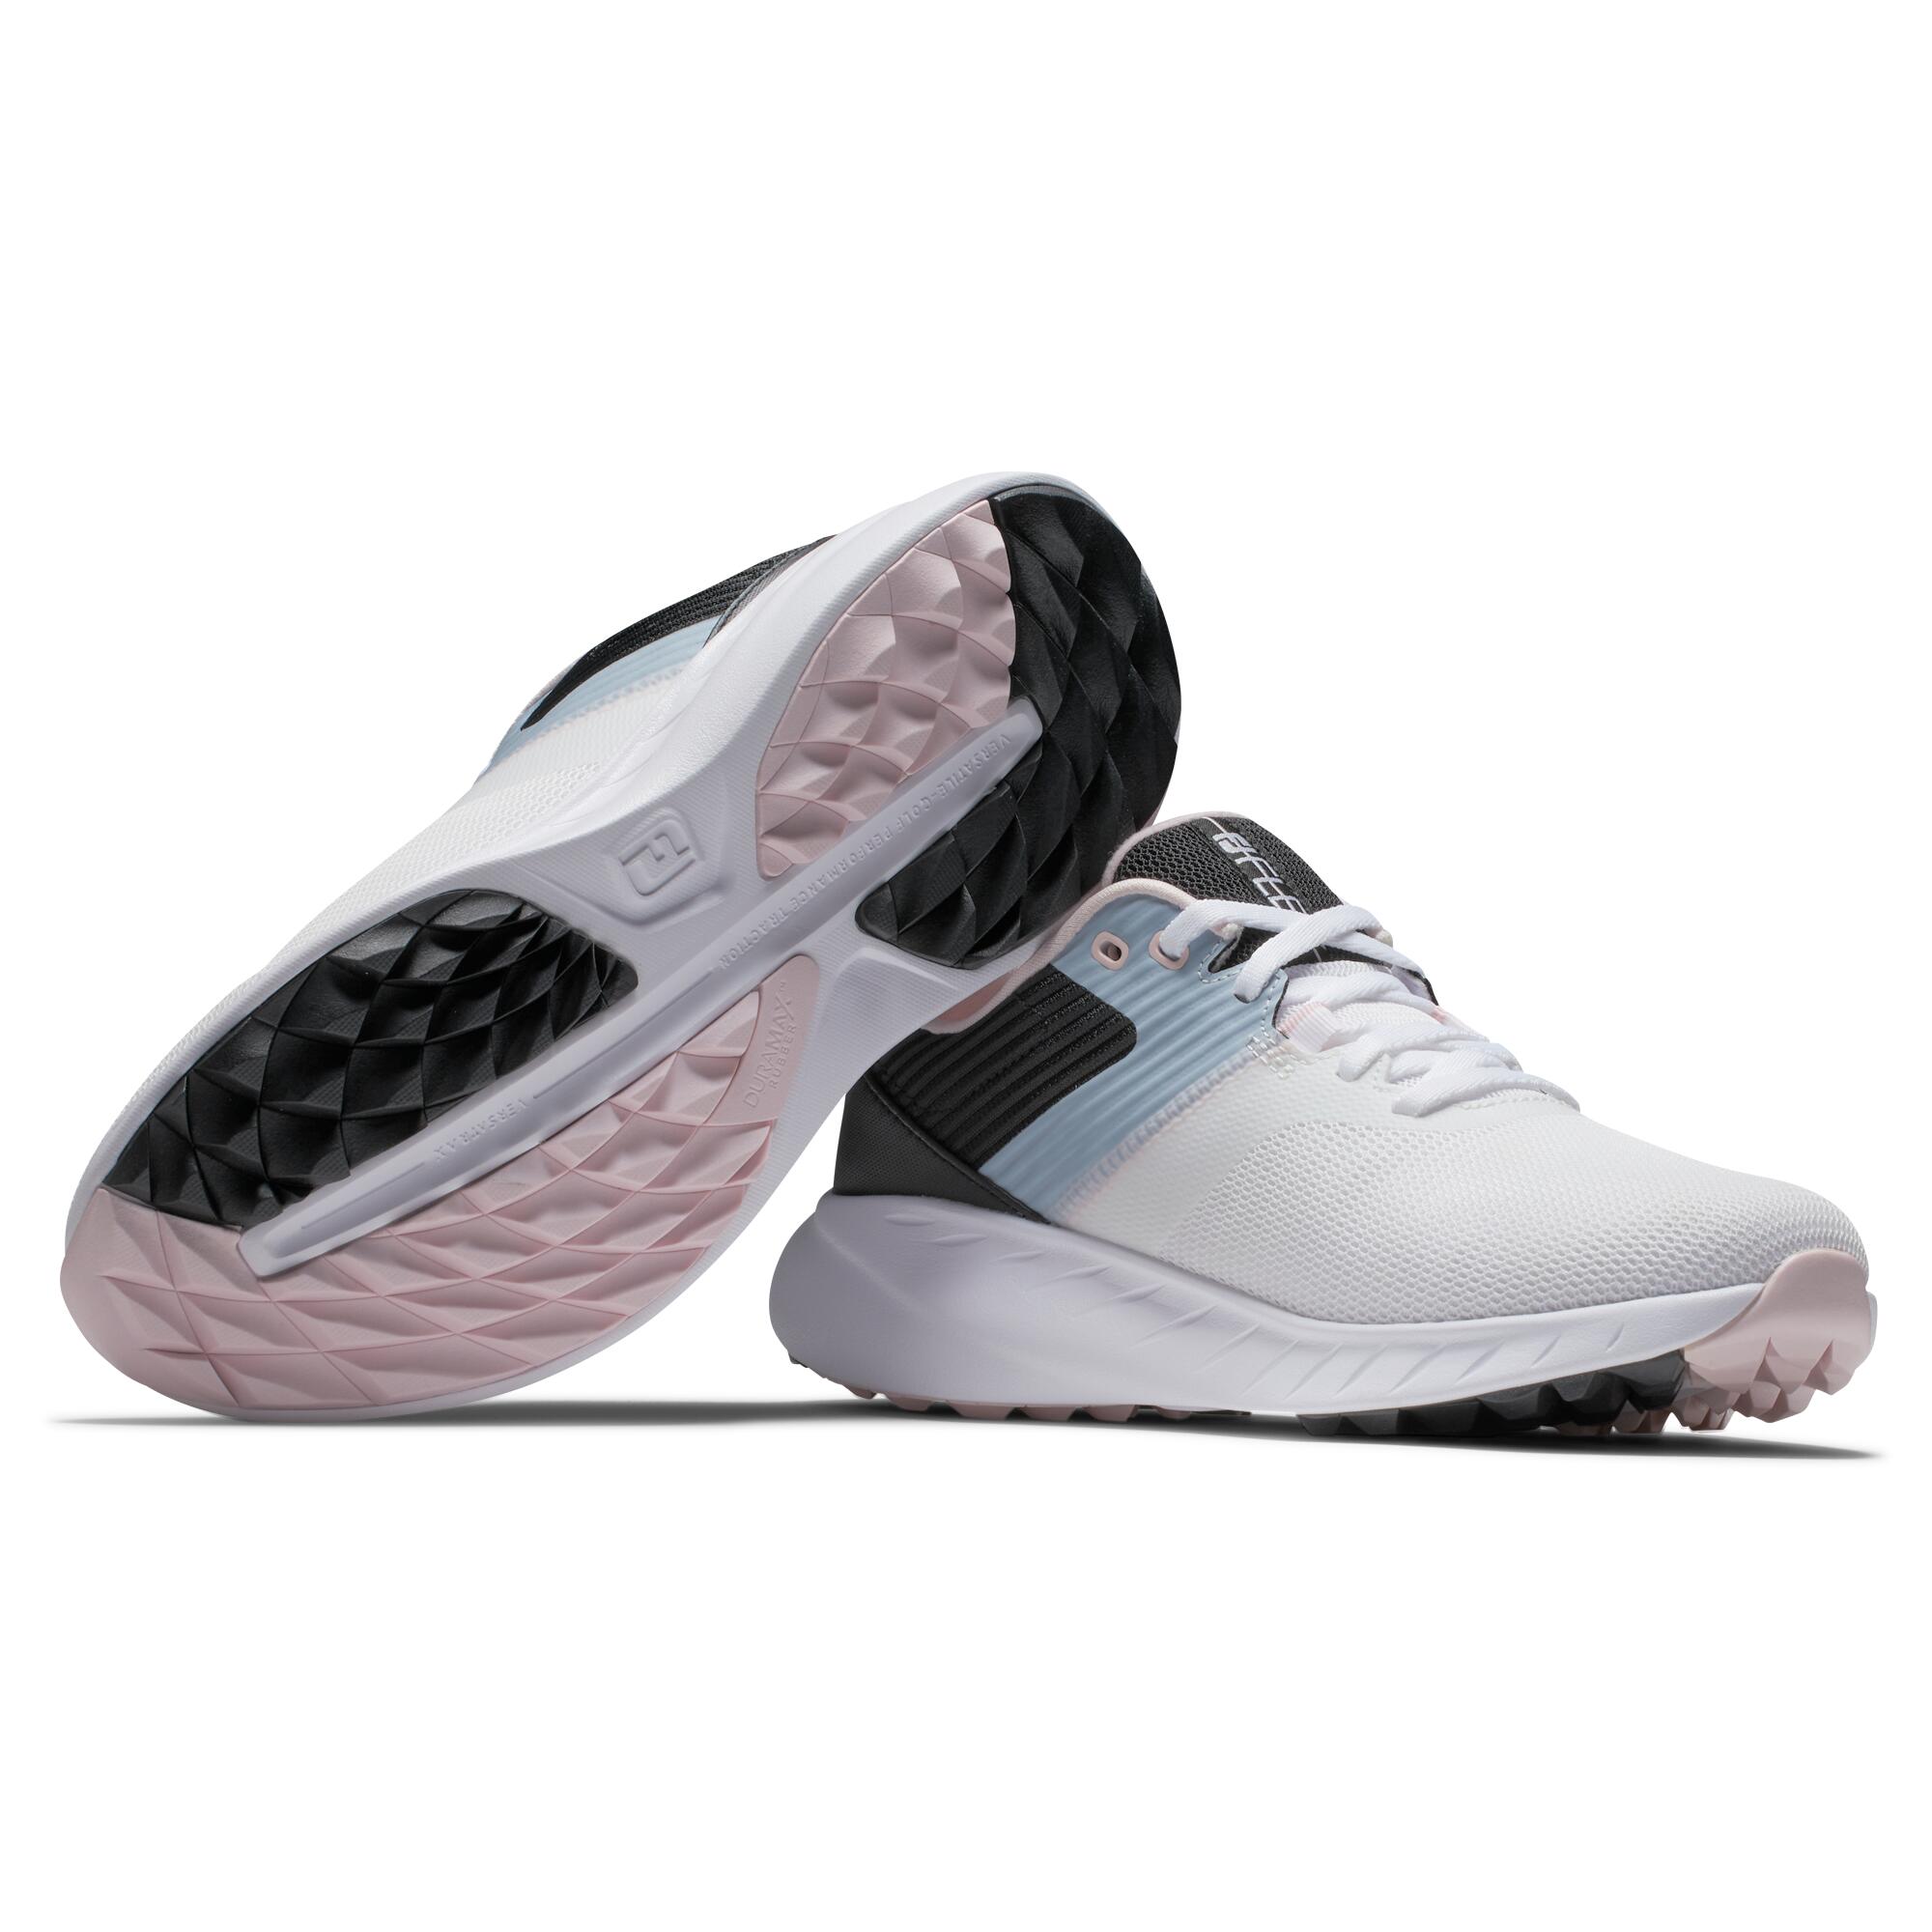 women's golf shoes breathable FOOTJOY FLEX - white and black 5/6